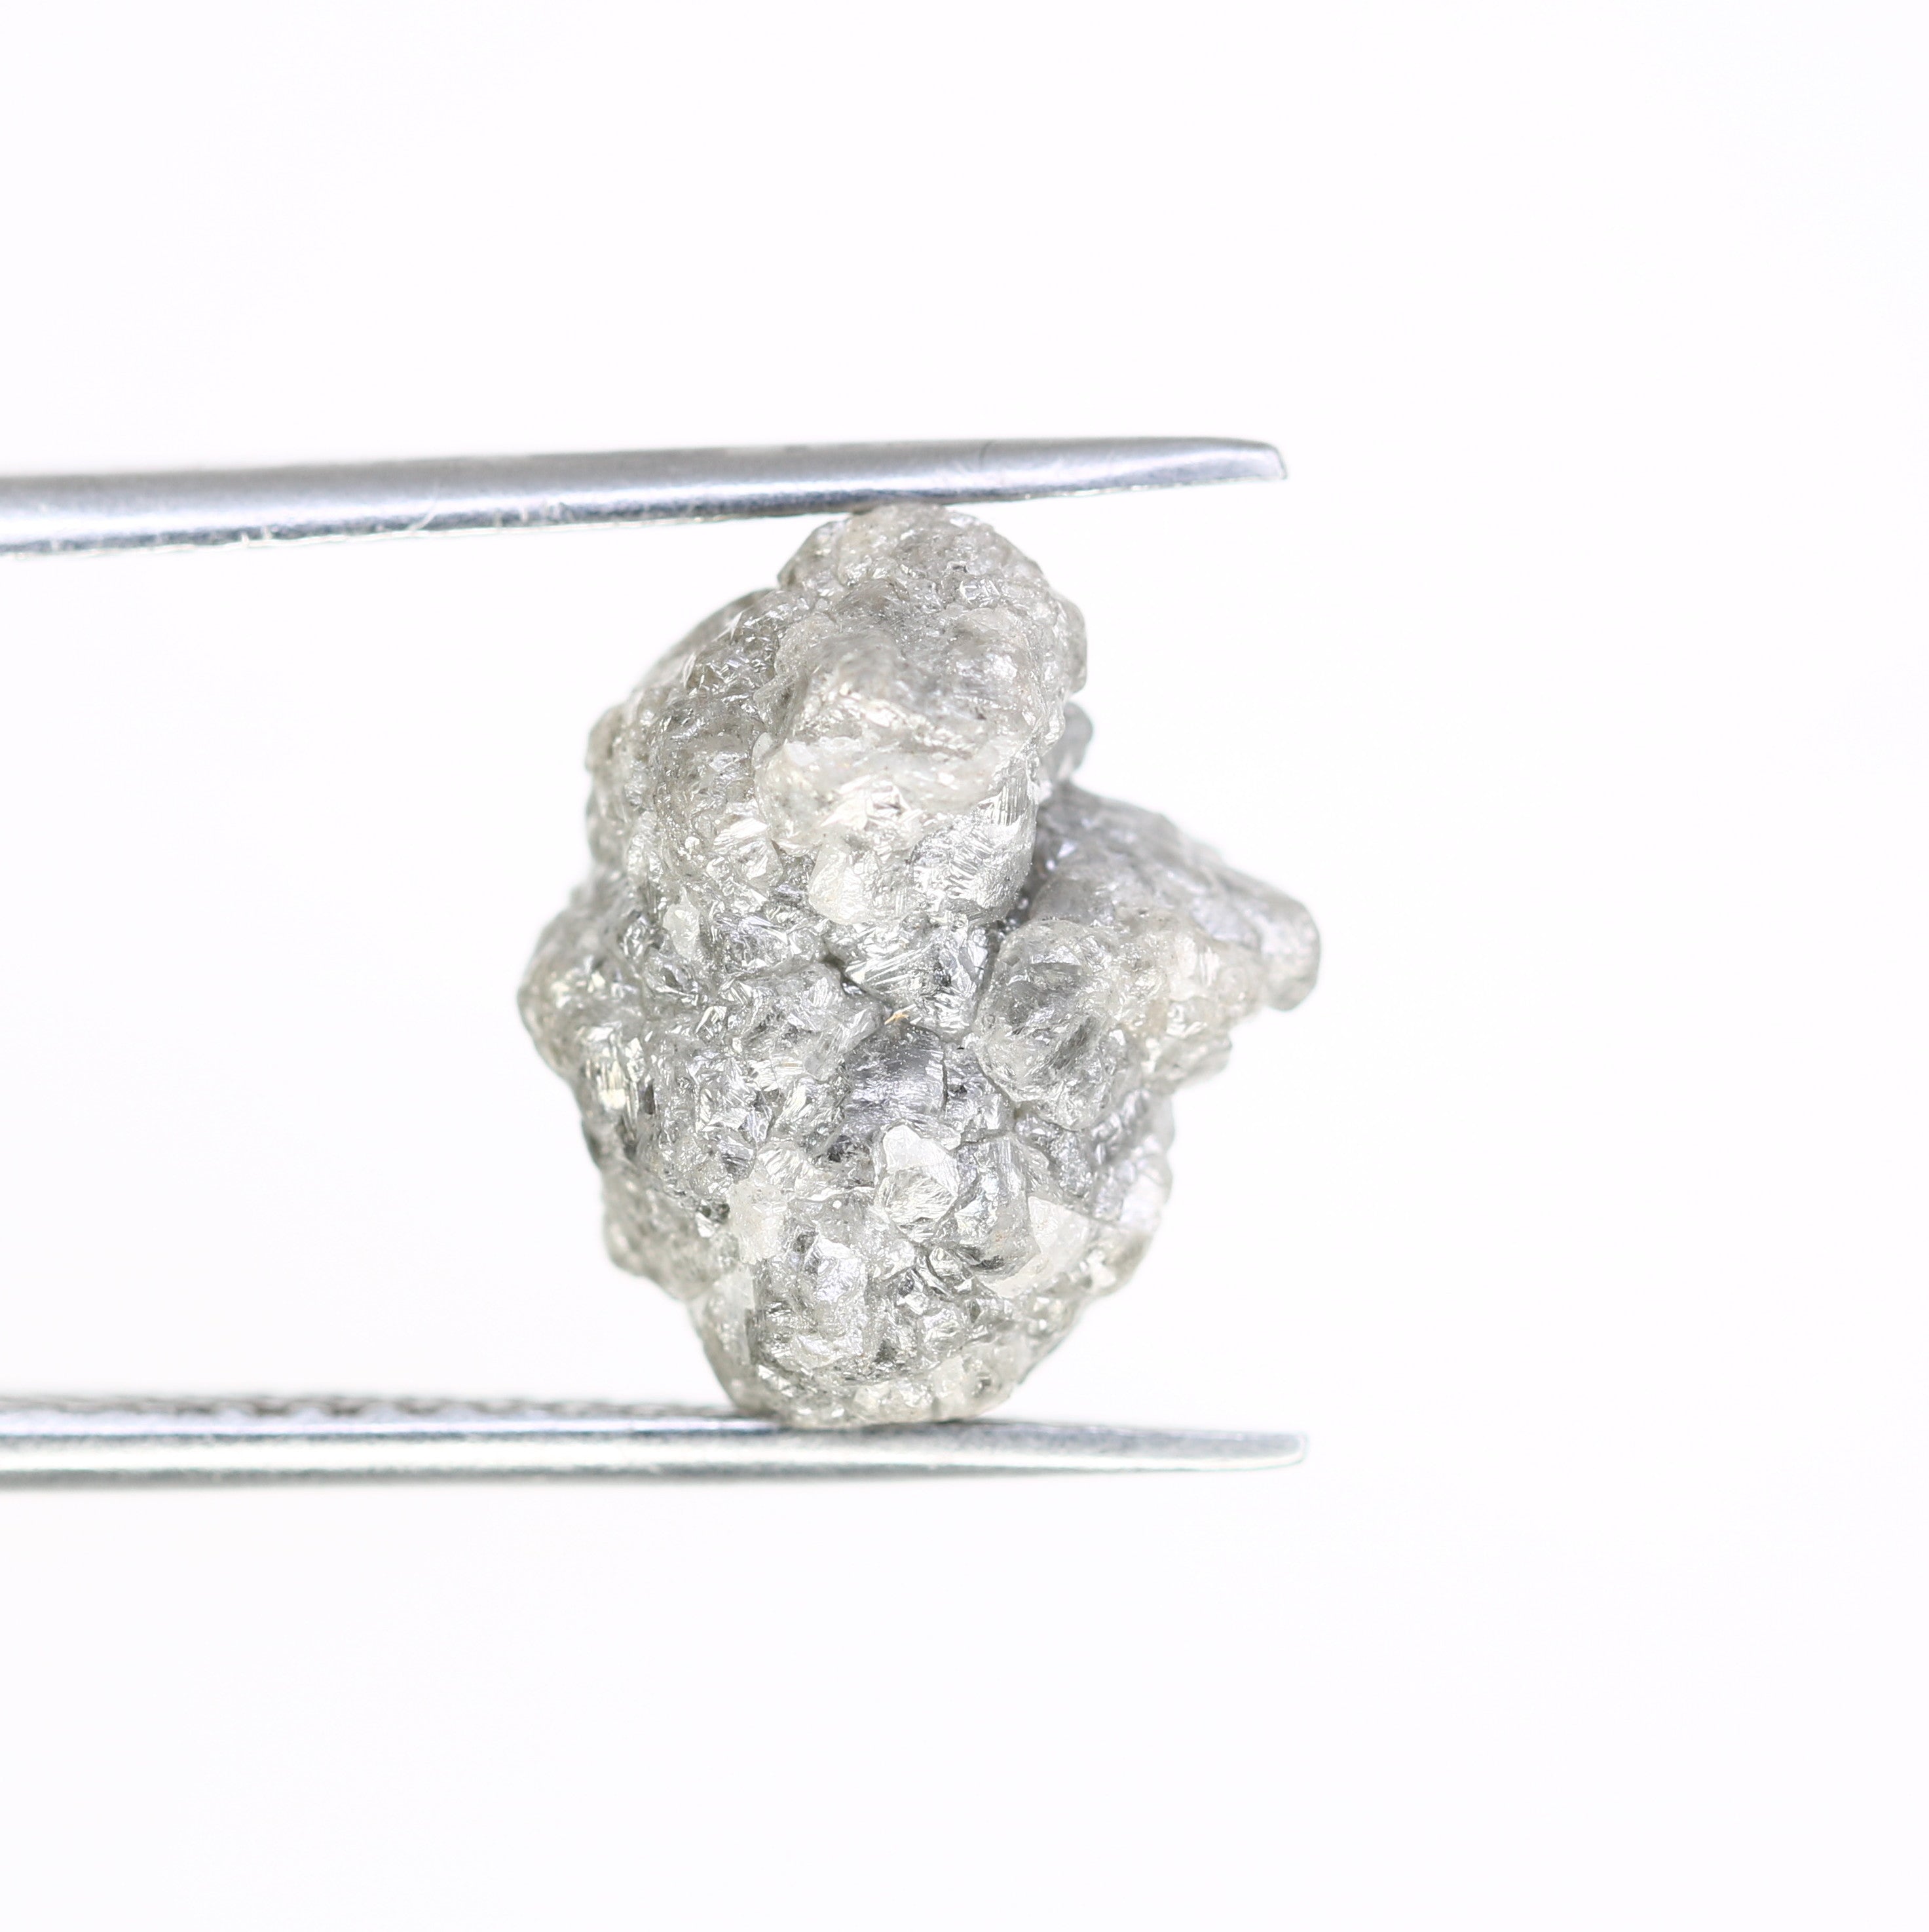 8.43 Carat 13.00 MM Natural Loose Grey Color Uncut Raw Rough Diamond For Diamond Jewelry